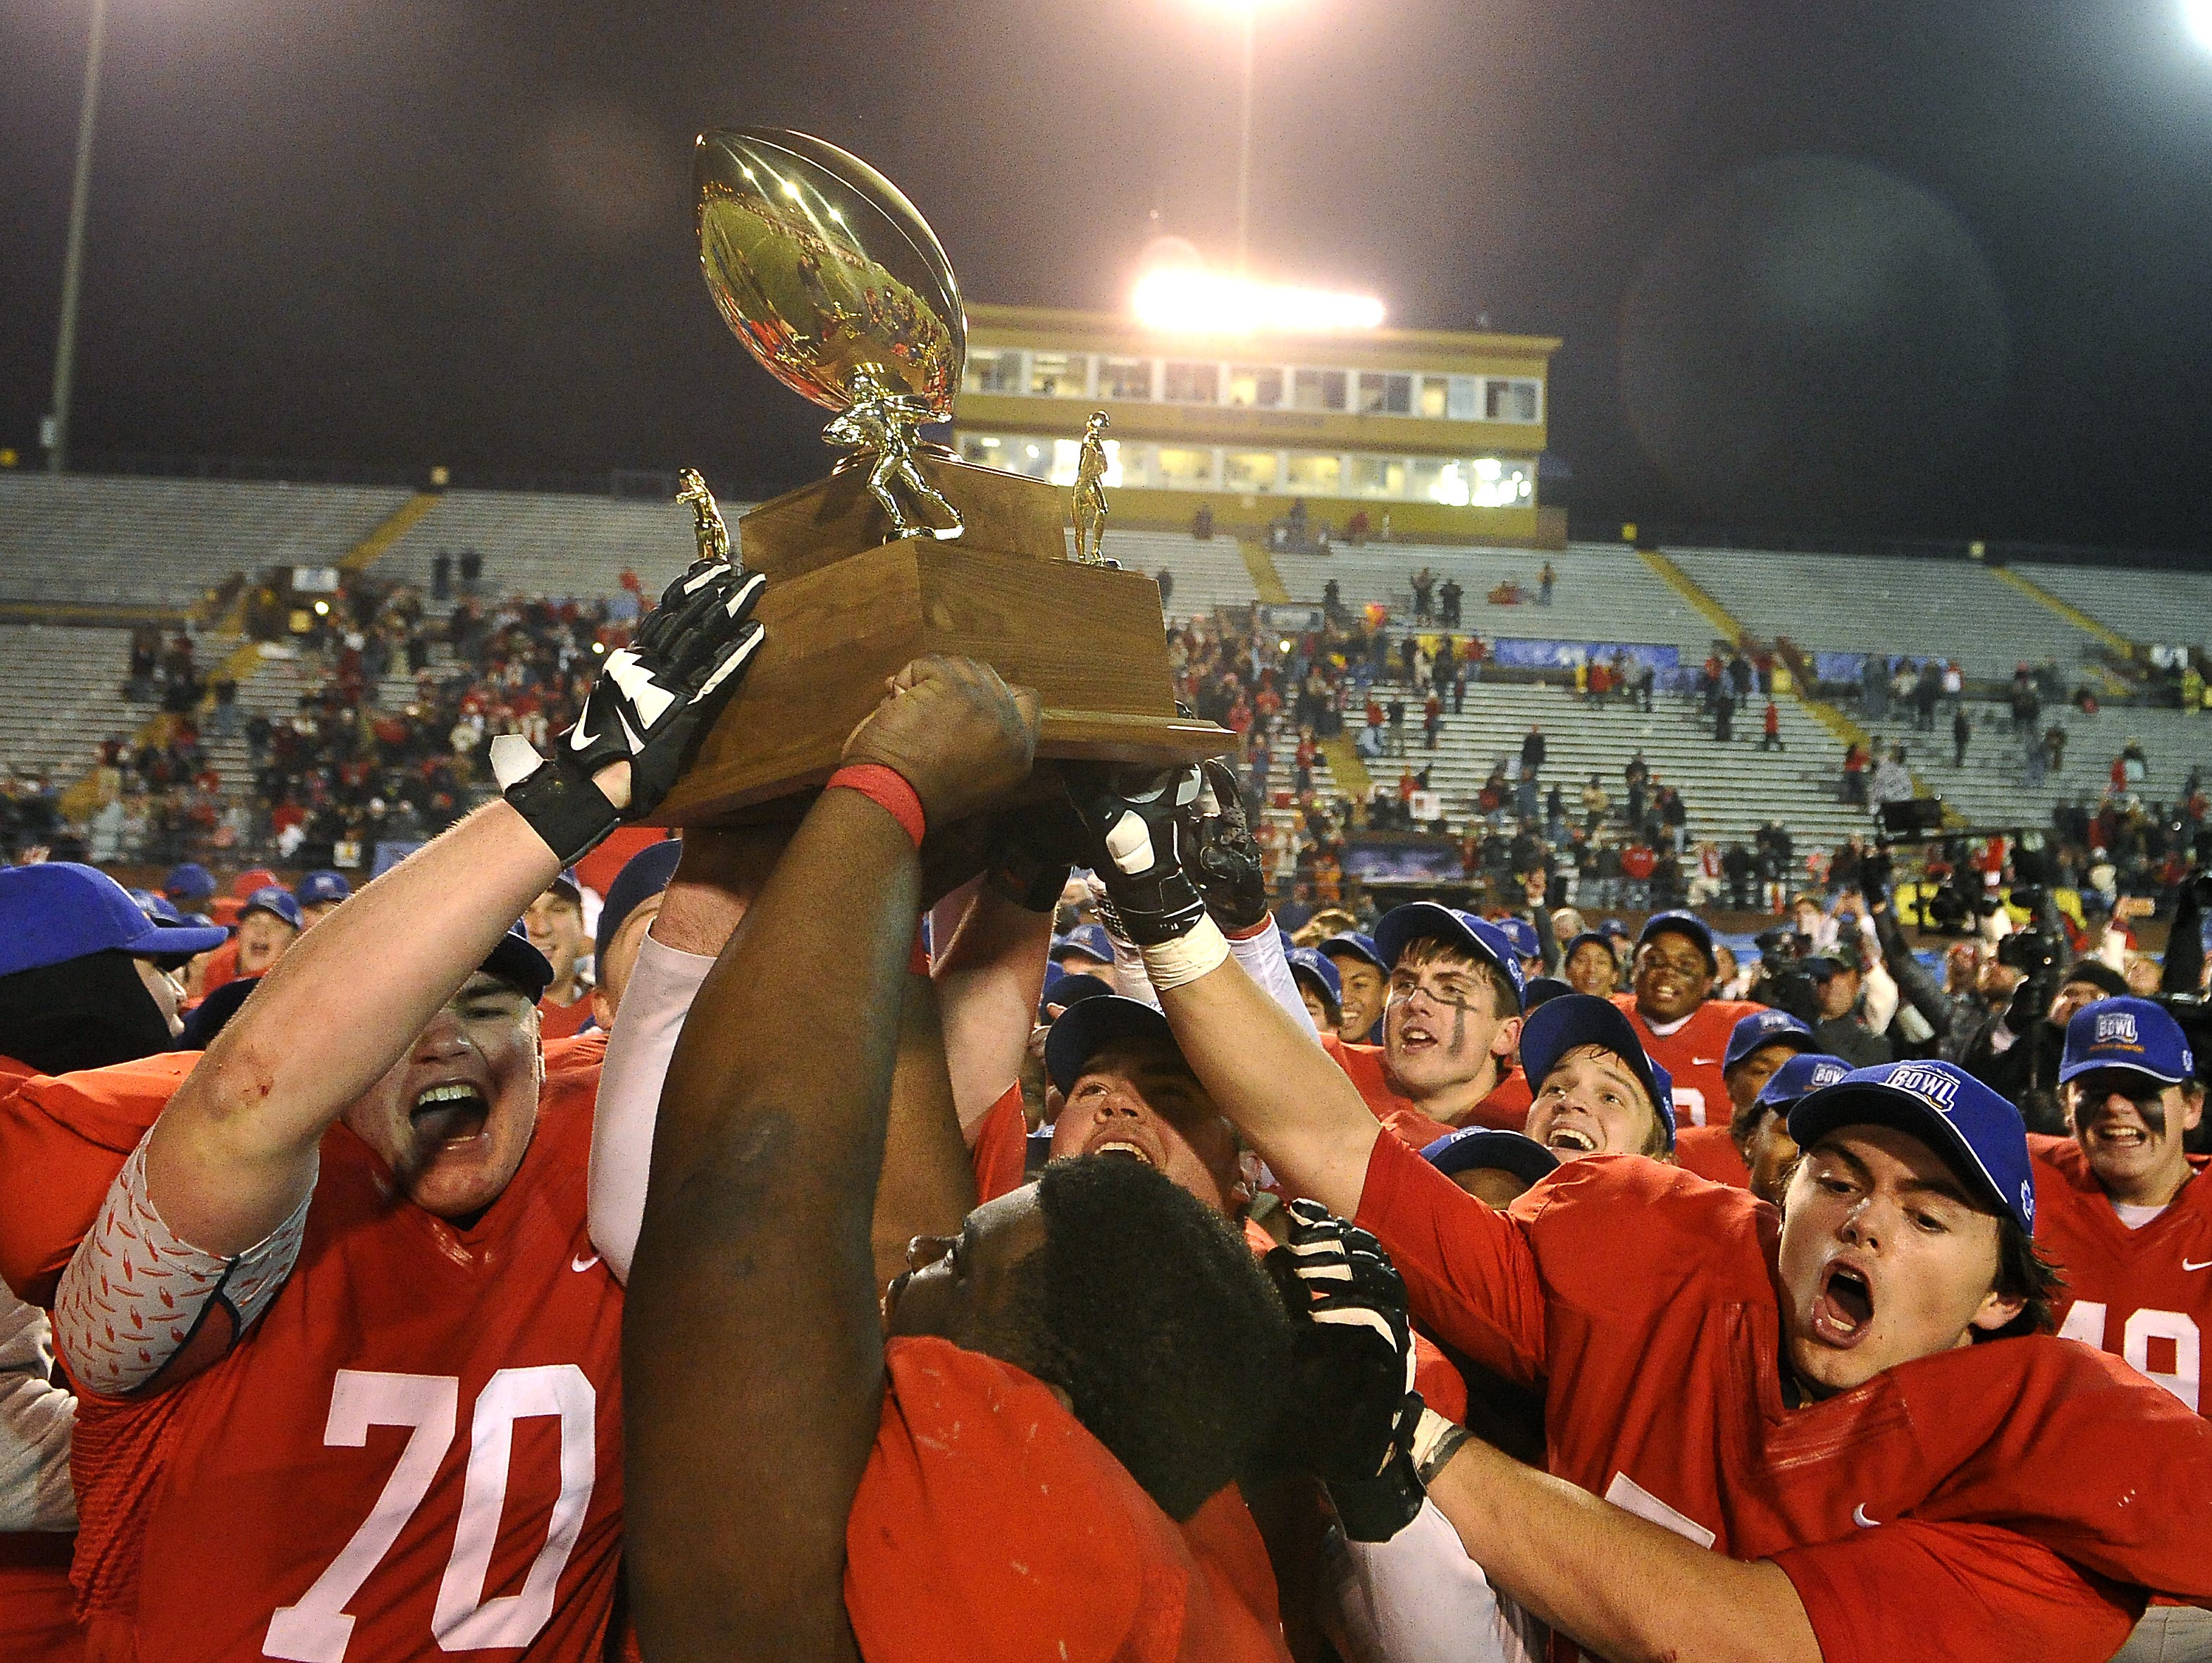 Brentwood Academy hoists the DII-AA state championship trophy after Thursday's win.